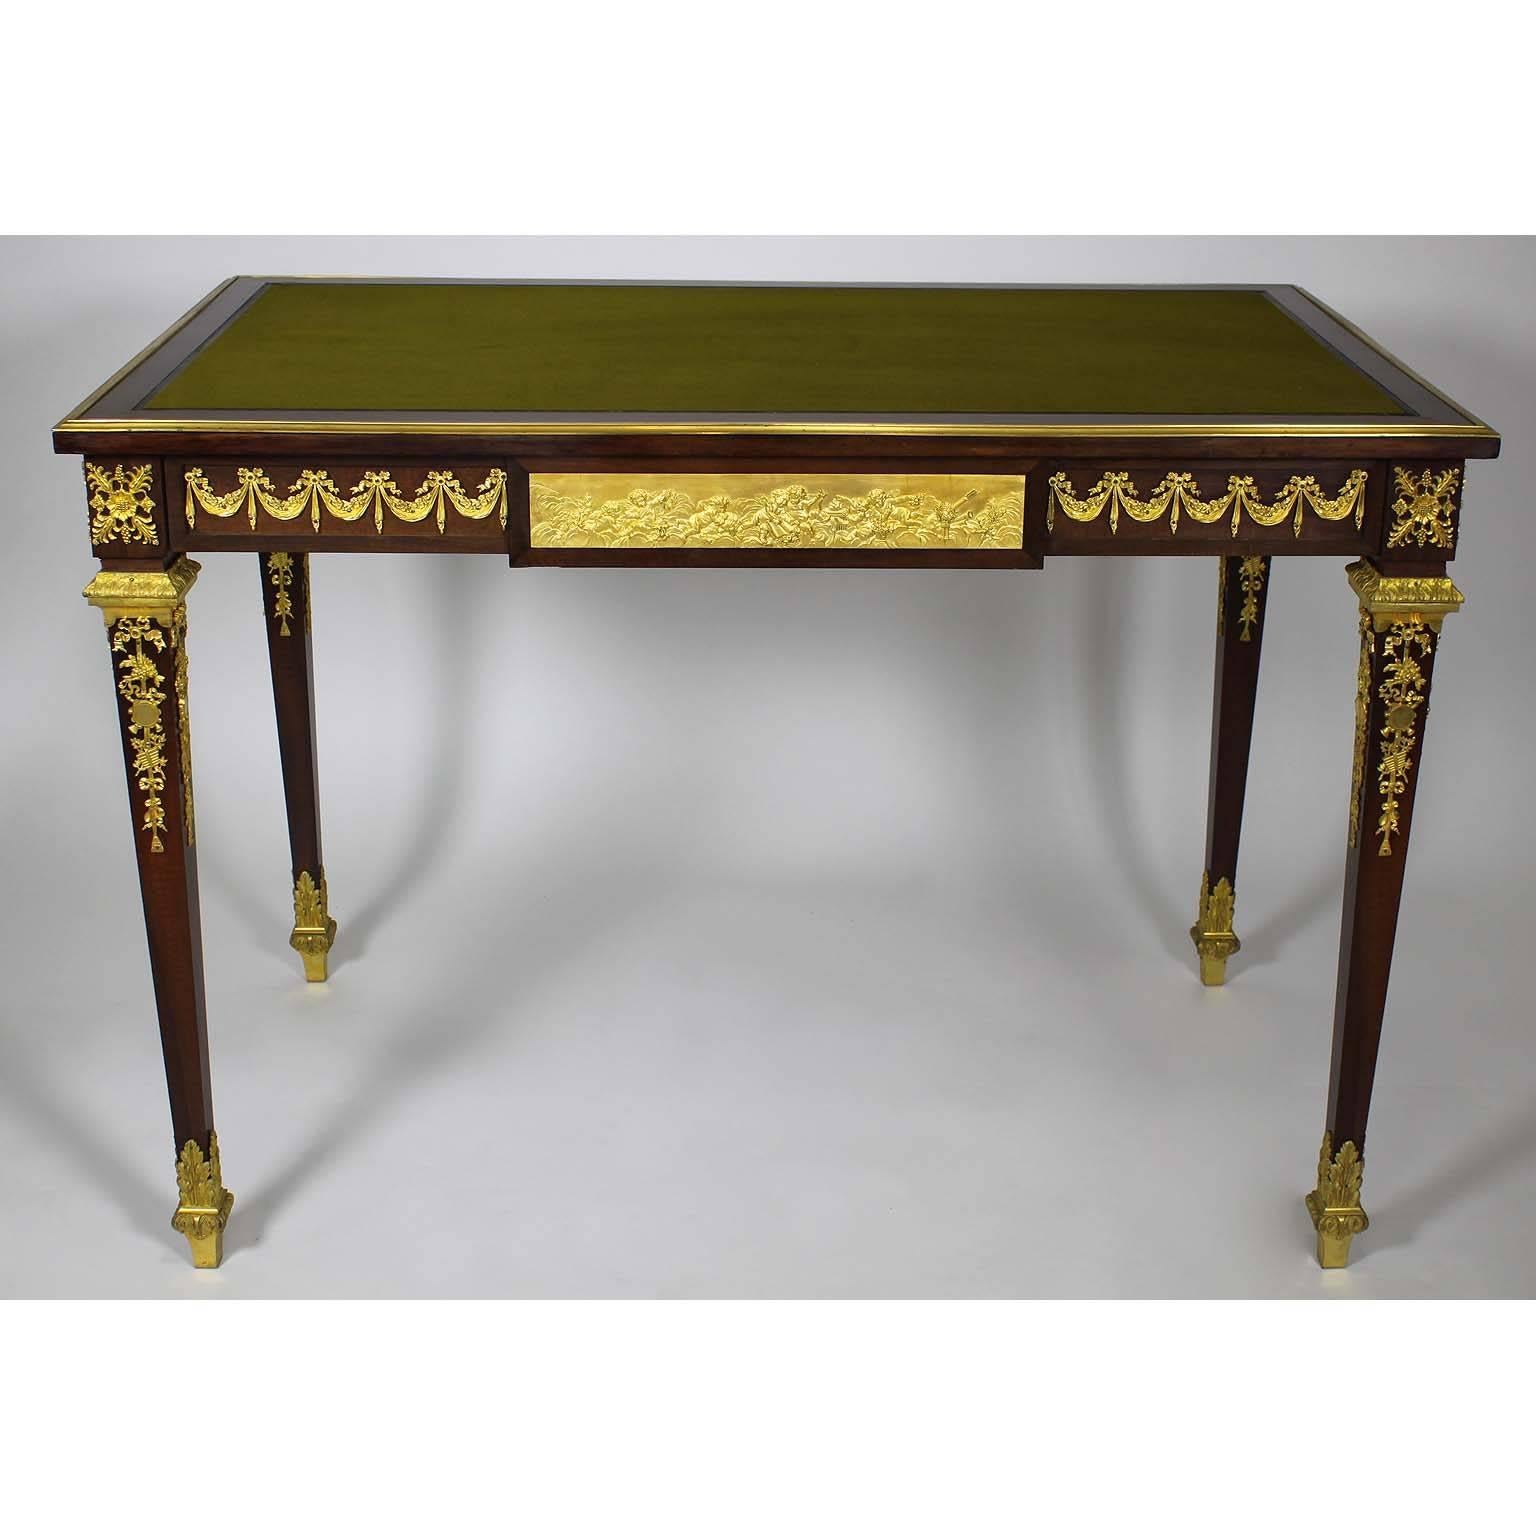 A very fine French 19th century Louis XVI style mahogany and ormolu-mounted writing table by G. Grimard 